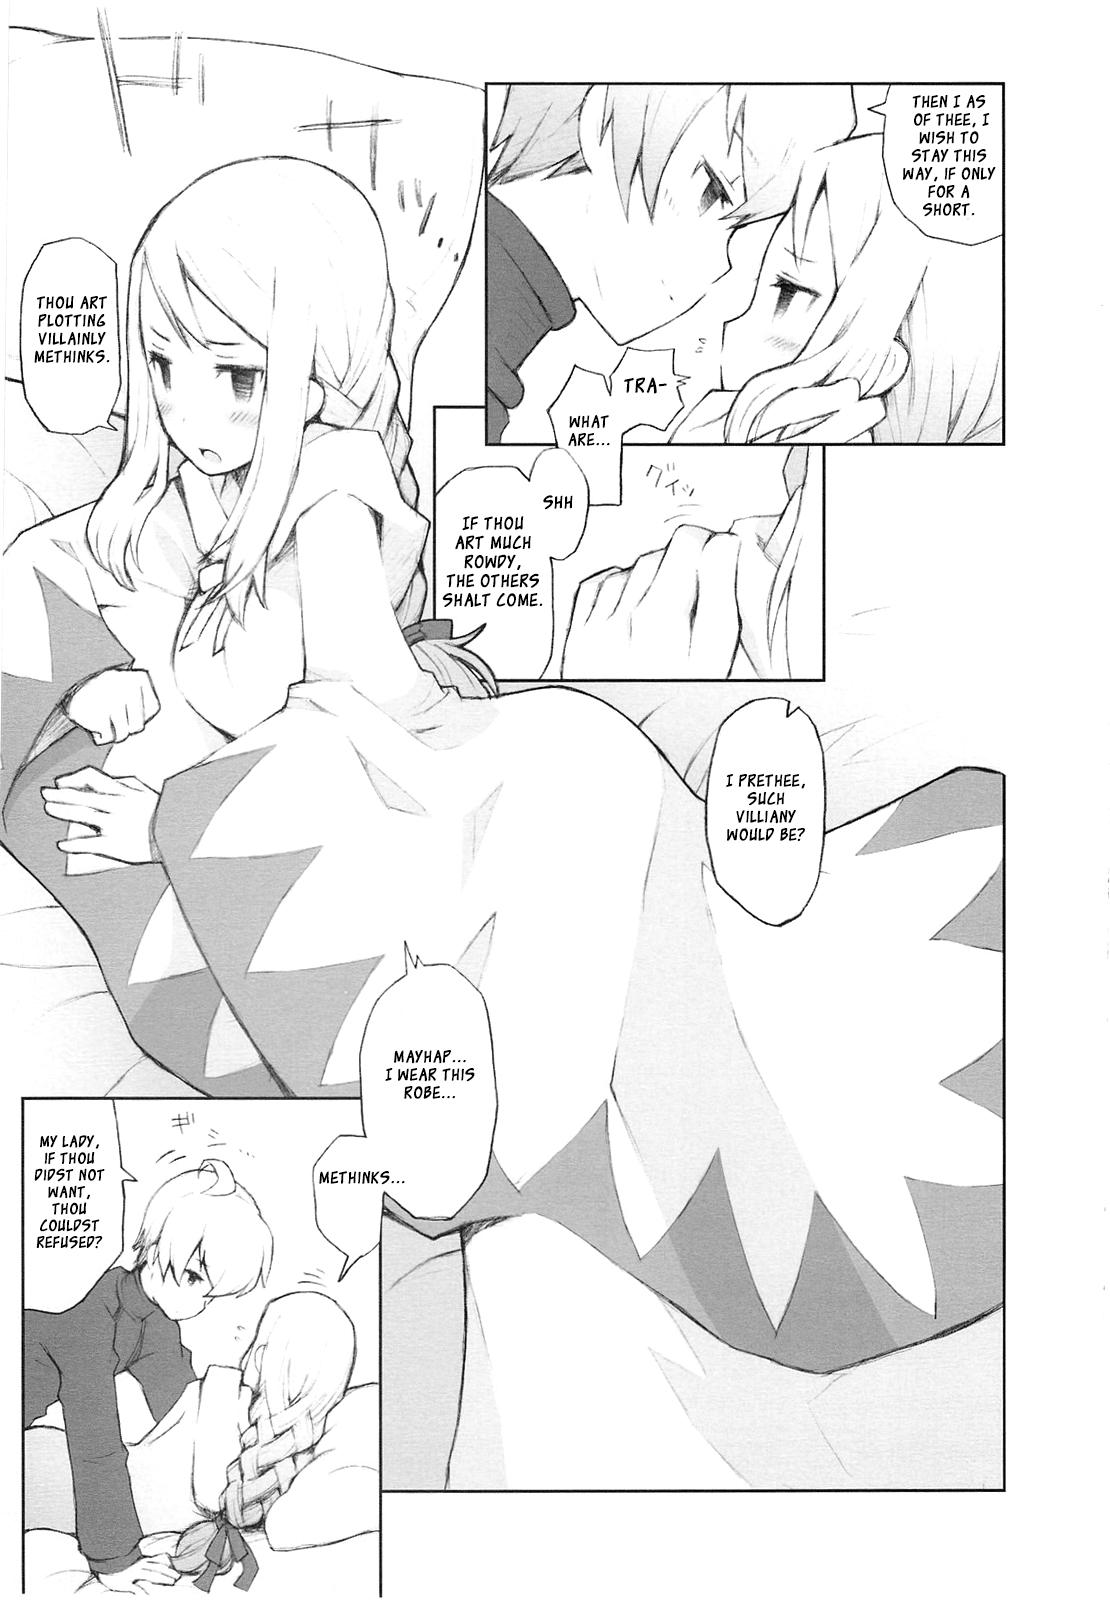 Creampies Like a White - Final fantasy tactics Indonesian - Page 8